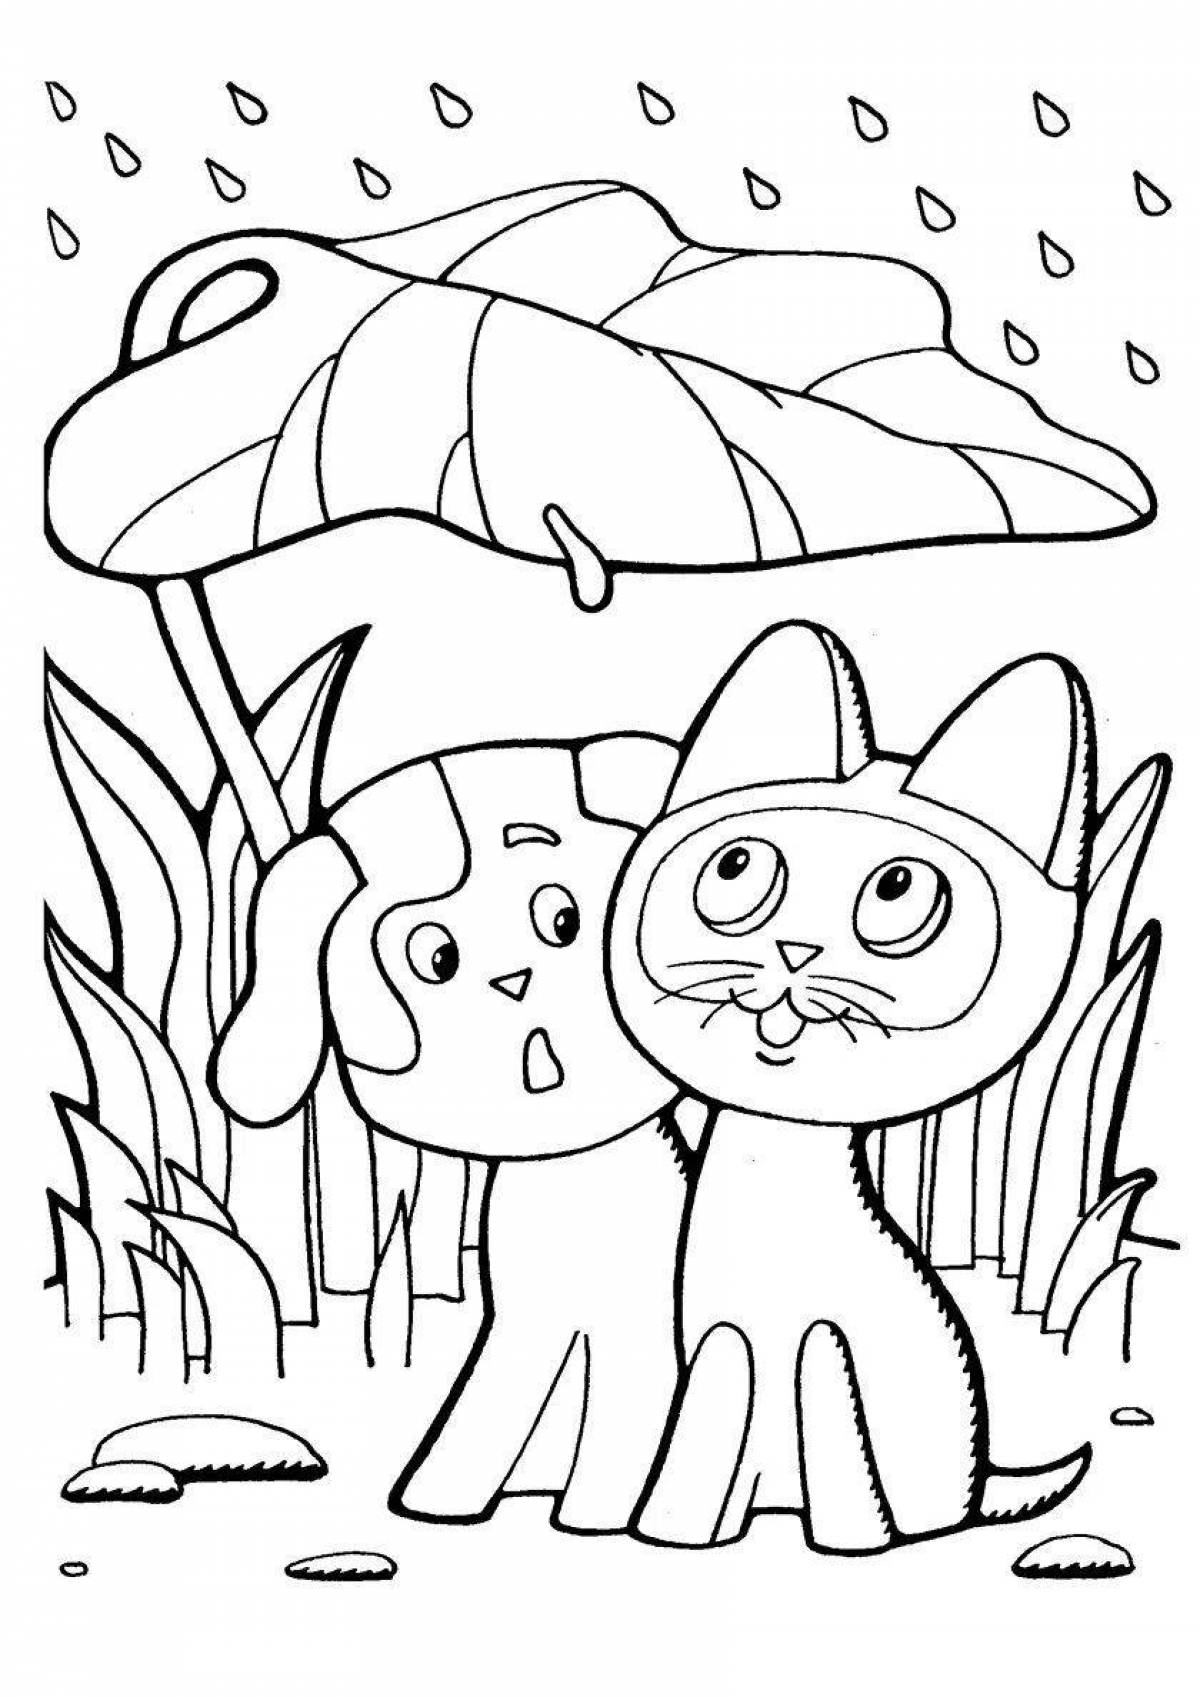 Witty cat coloring book